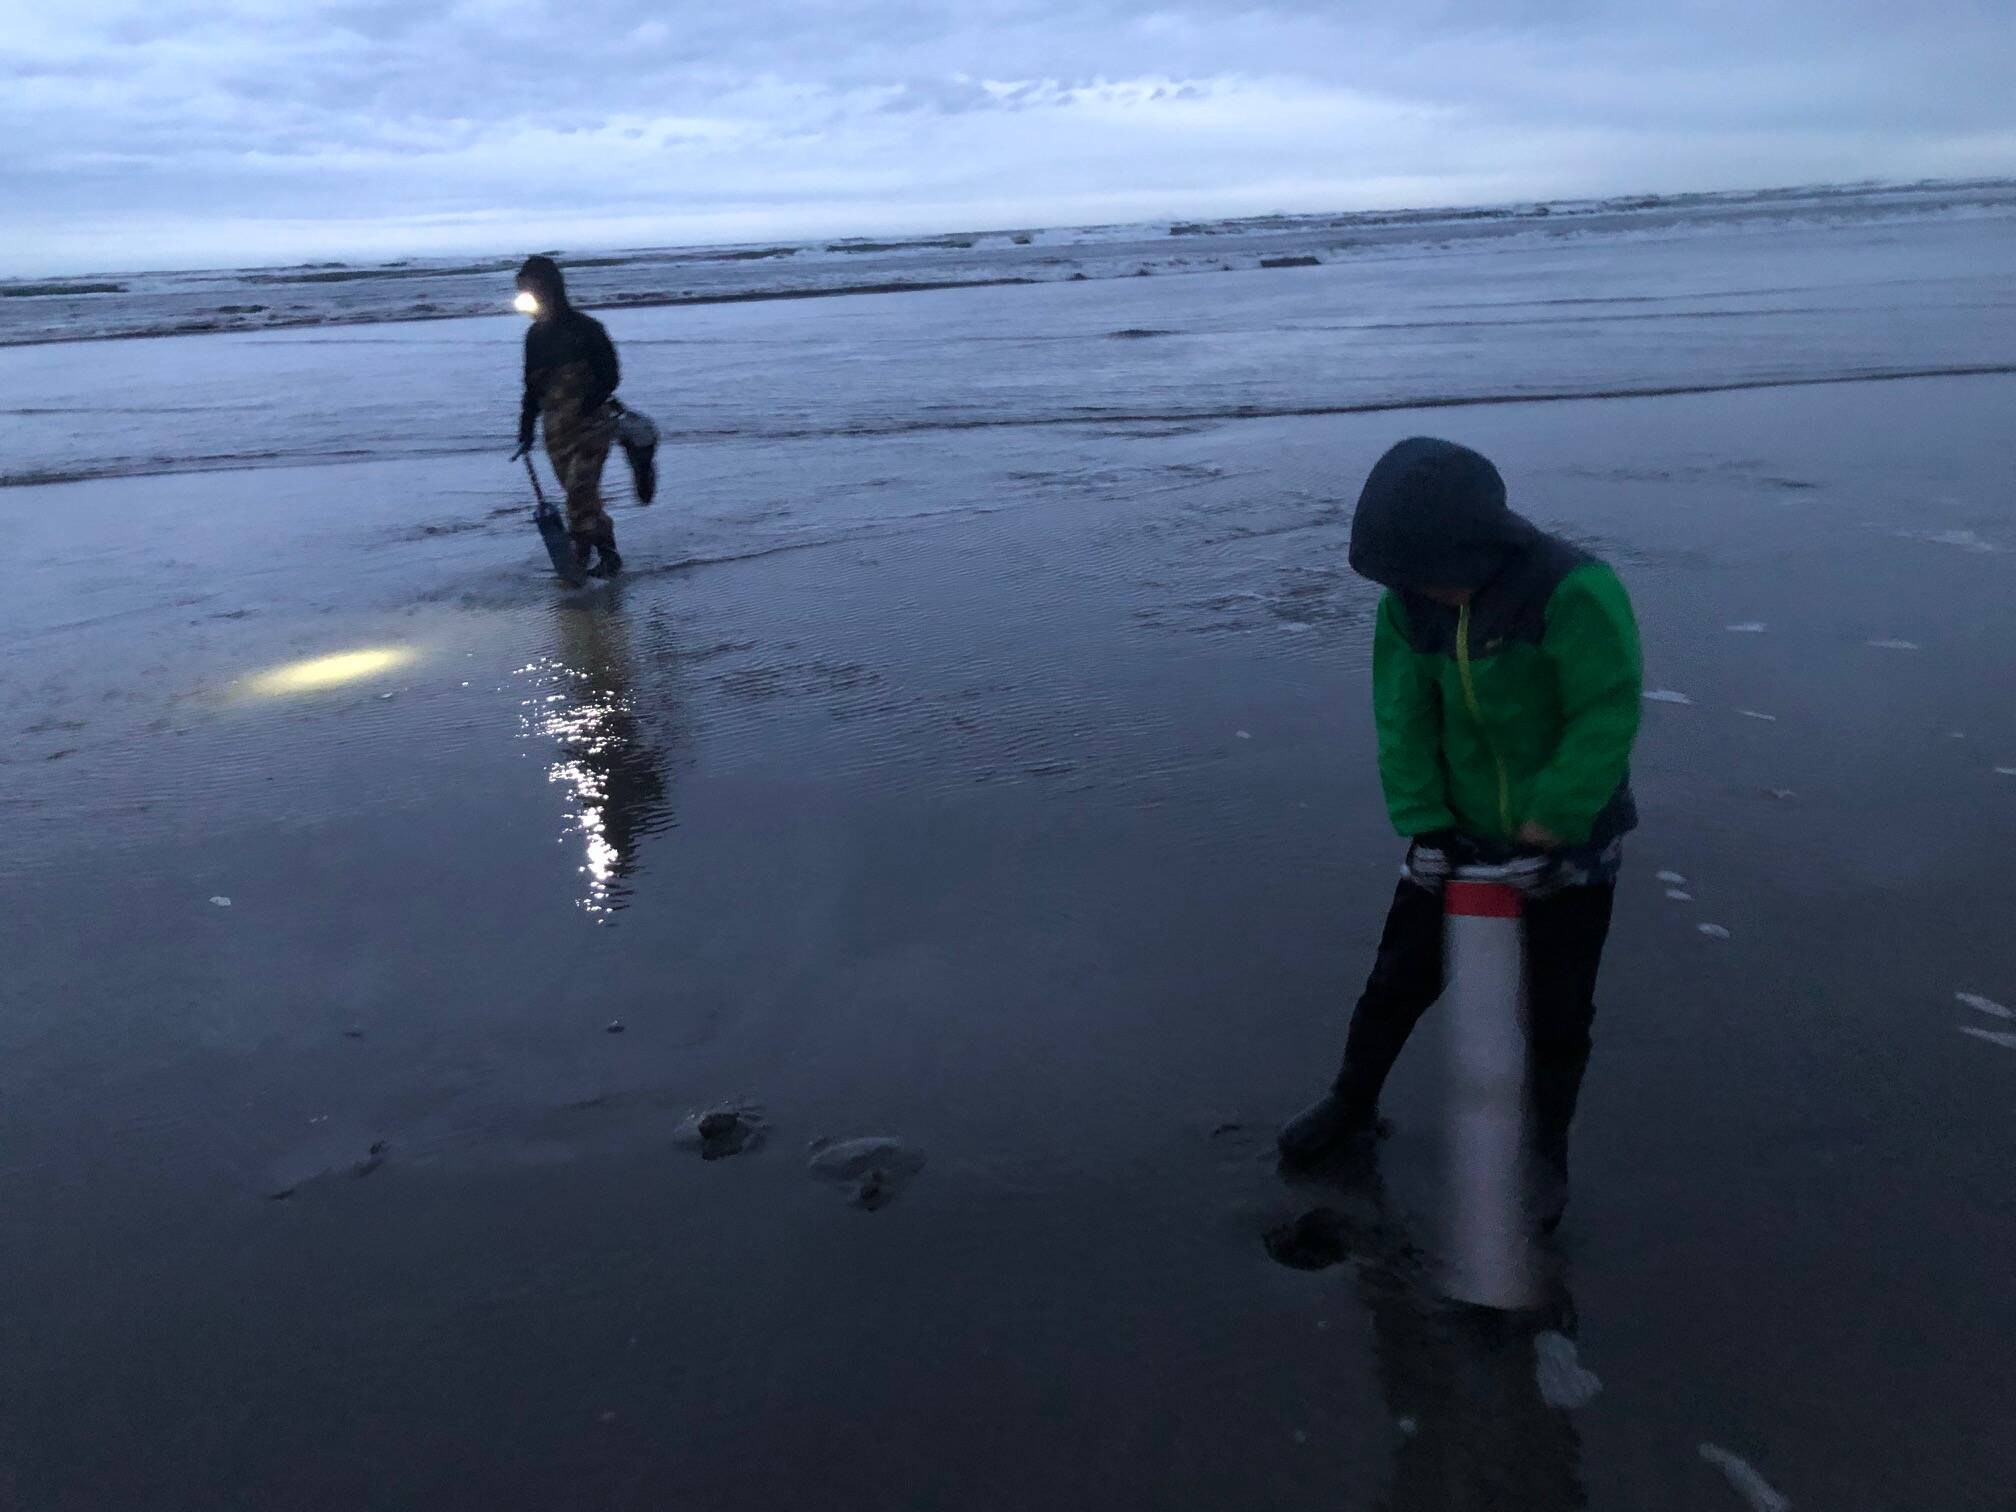 Michael Wagar / The Daily World
A mother and son dig razor clams Saturday evening at Mocrocks.